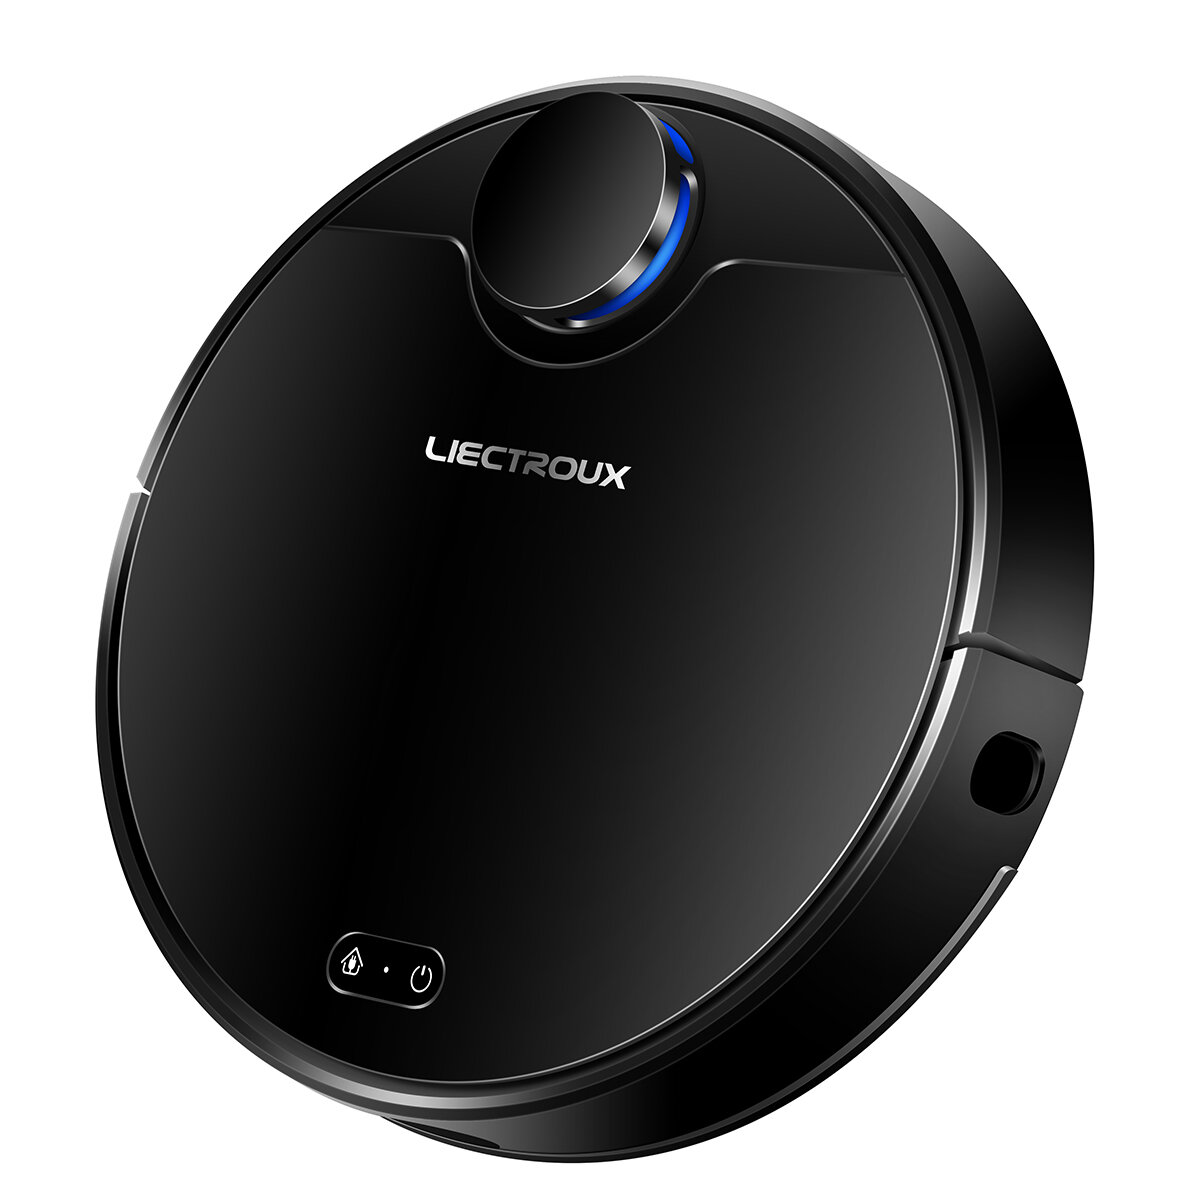 Image of [EU Direct] LIECTROUX ZK901 Robot Vacuum Cleaner Laser Map Navigation Sweeping Mopping 4000Pa Suction 450ml Electric Wat